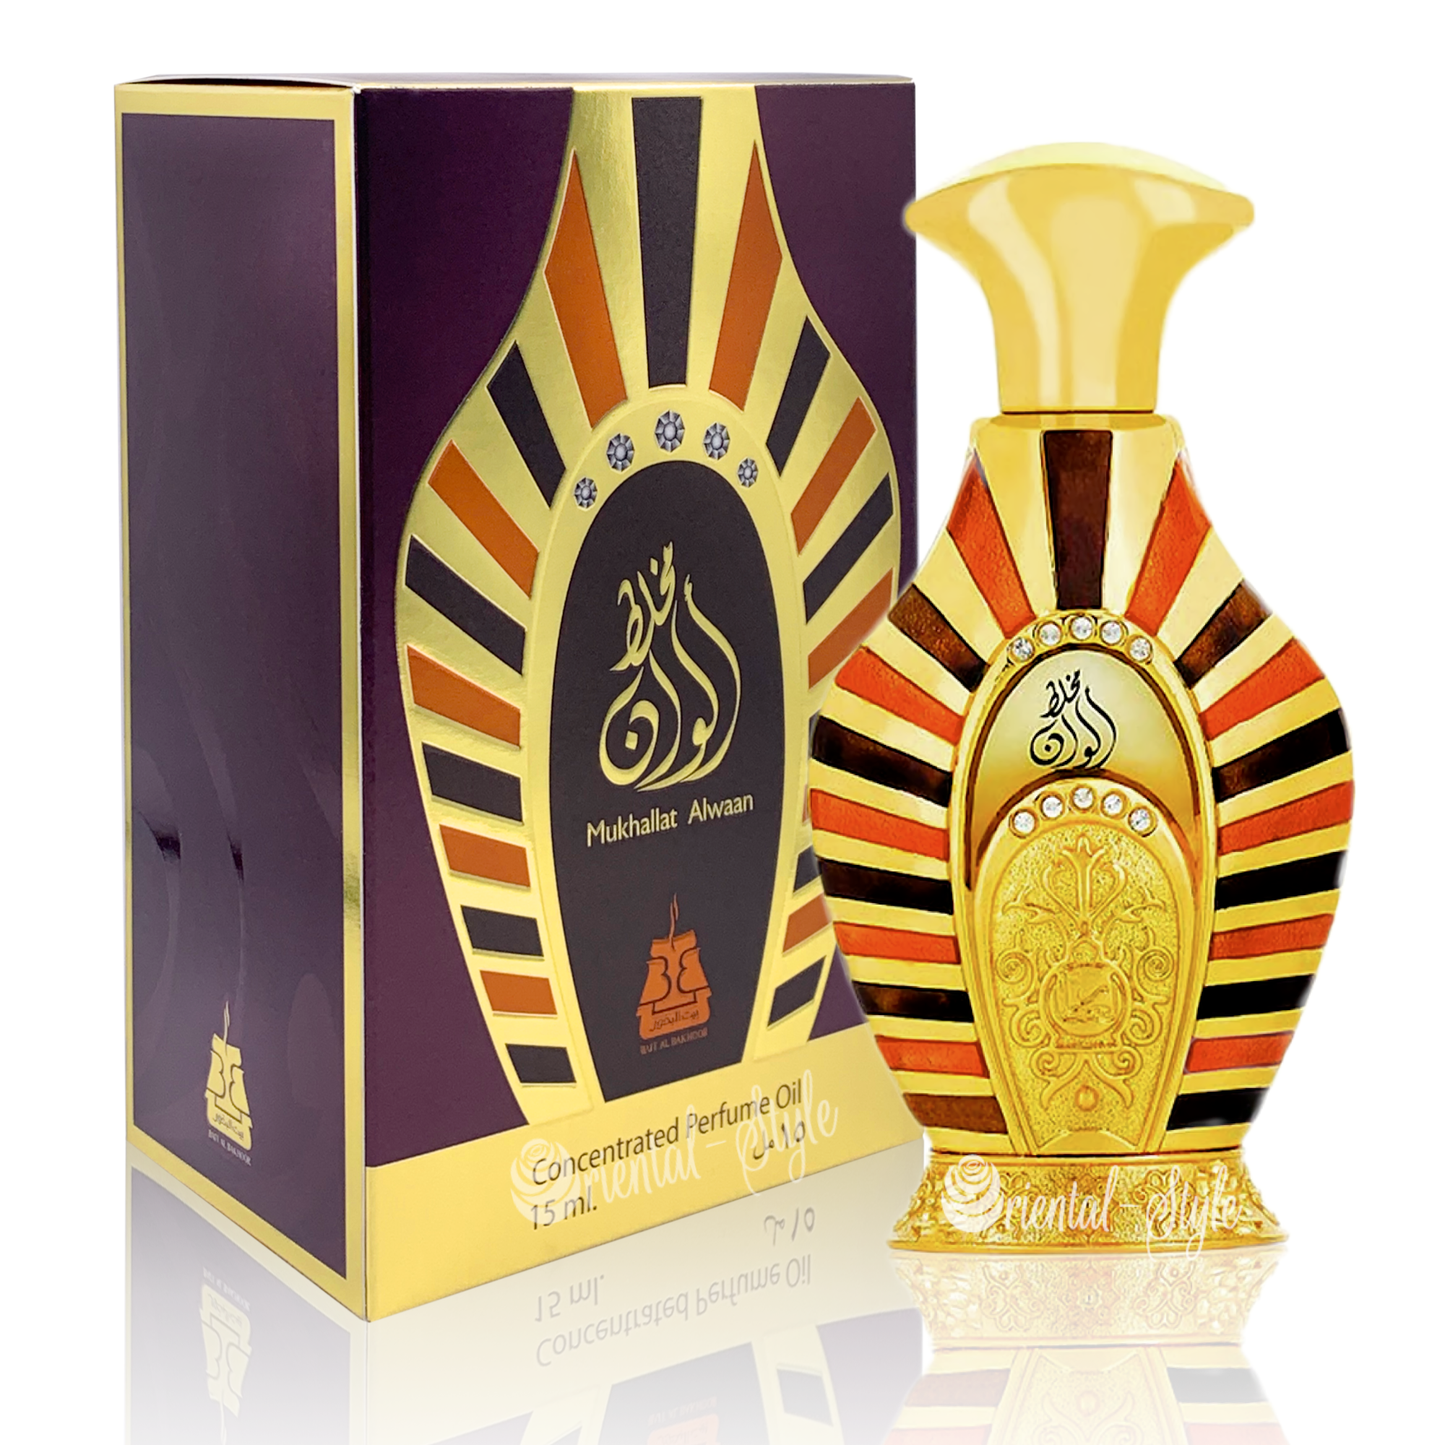 MUKHALLAT ALWAAN CONCENTRATED PERFUME OIL